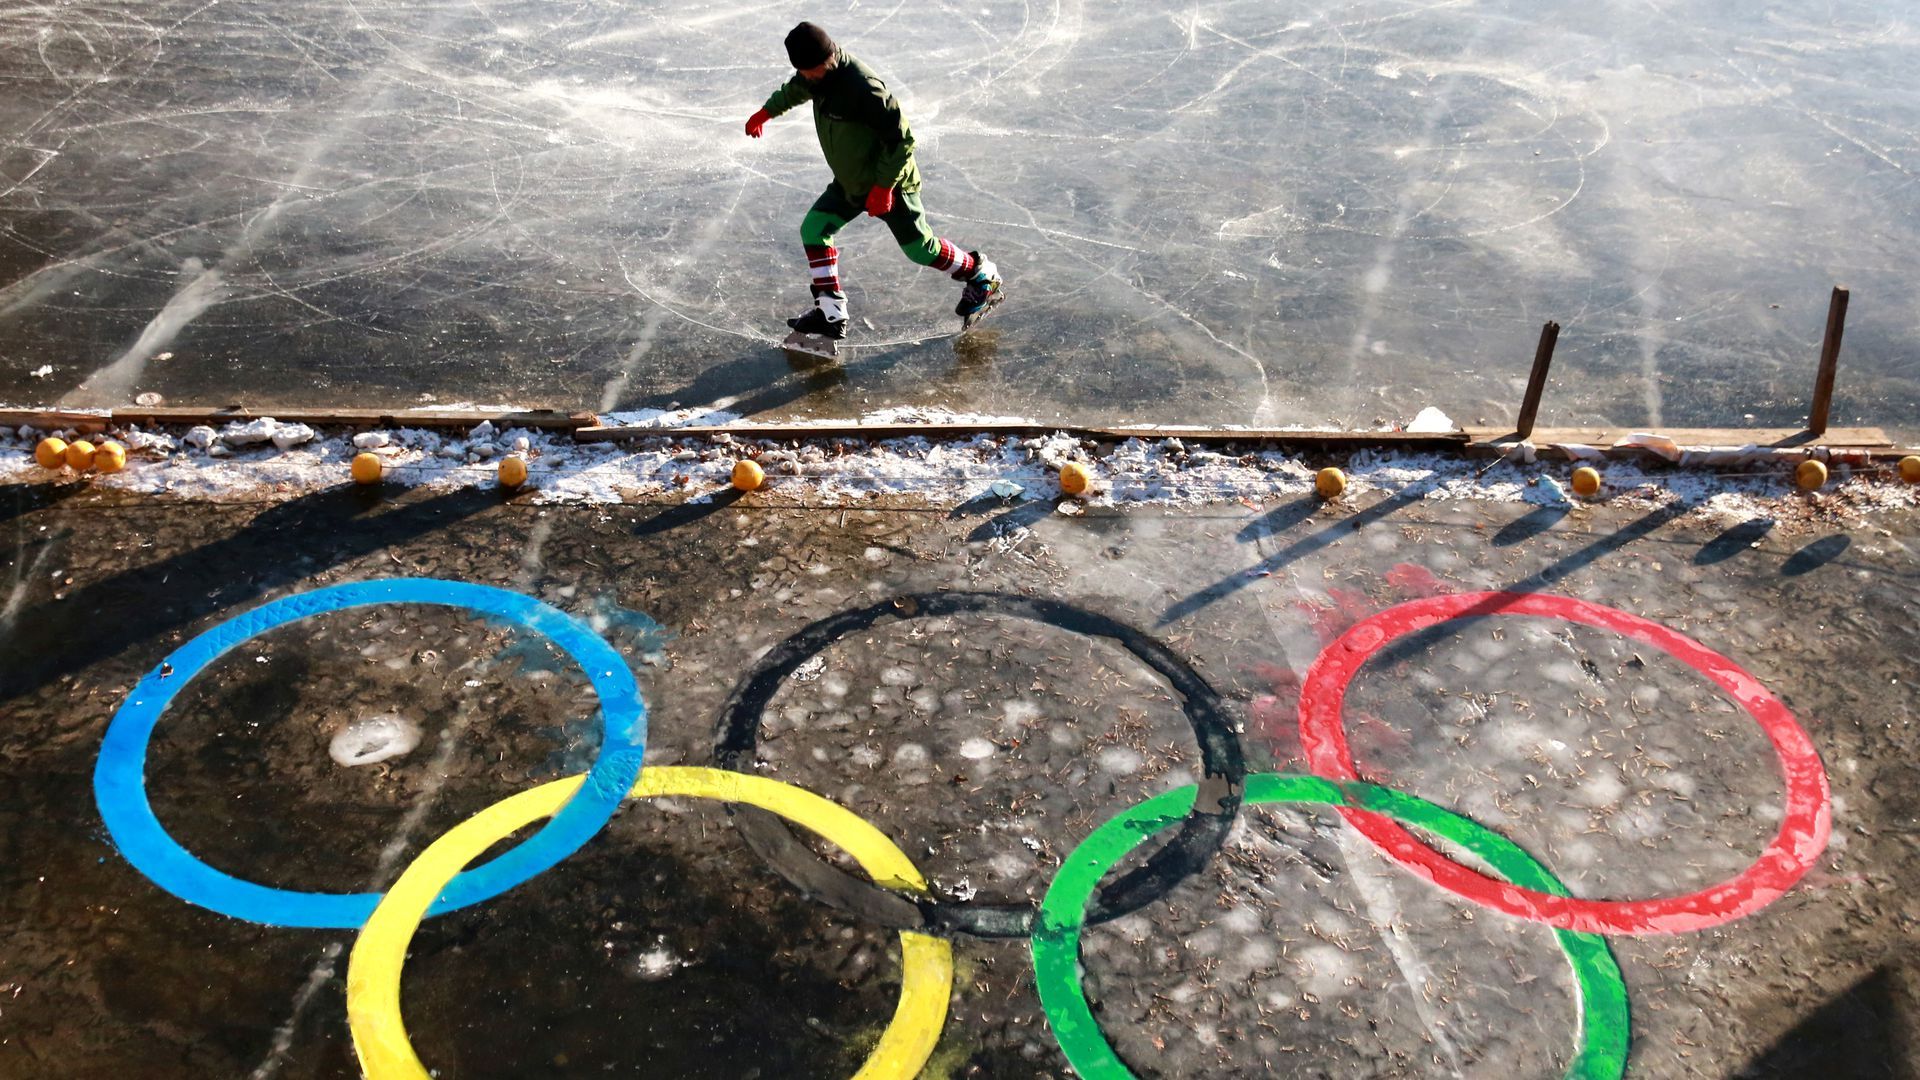 A man ice skating on an outdoor rink in Shenyang, Liaoning Province of China.